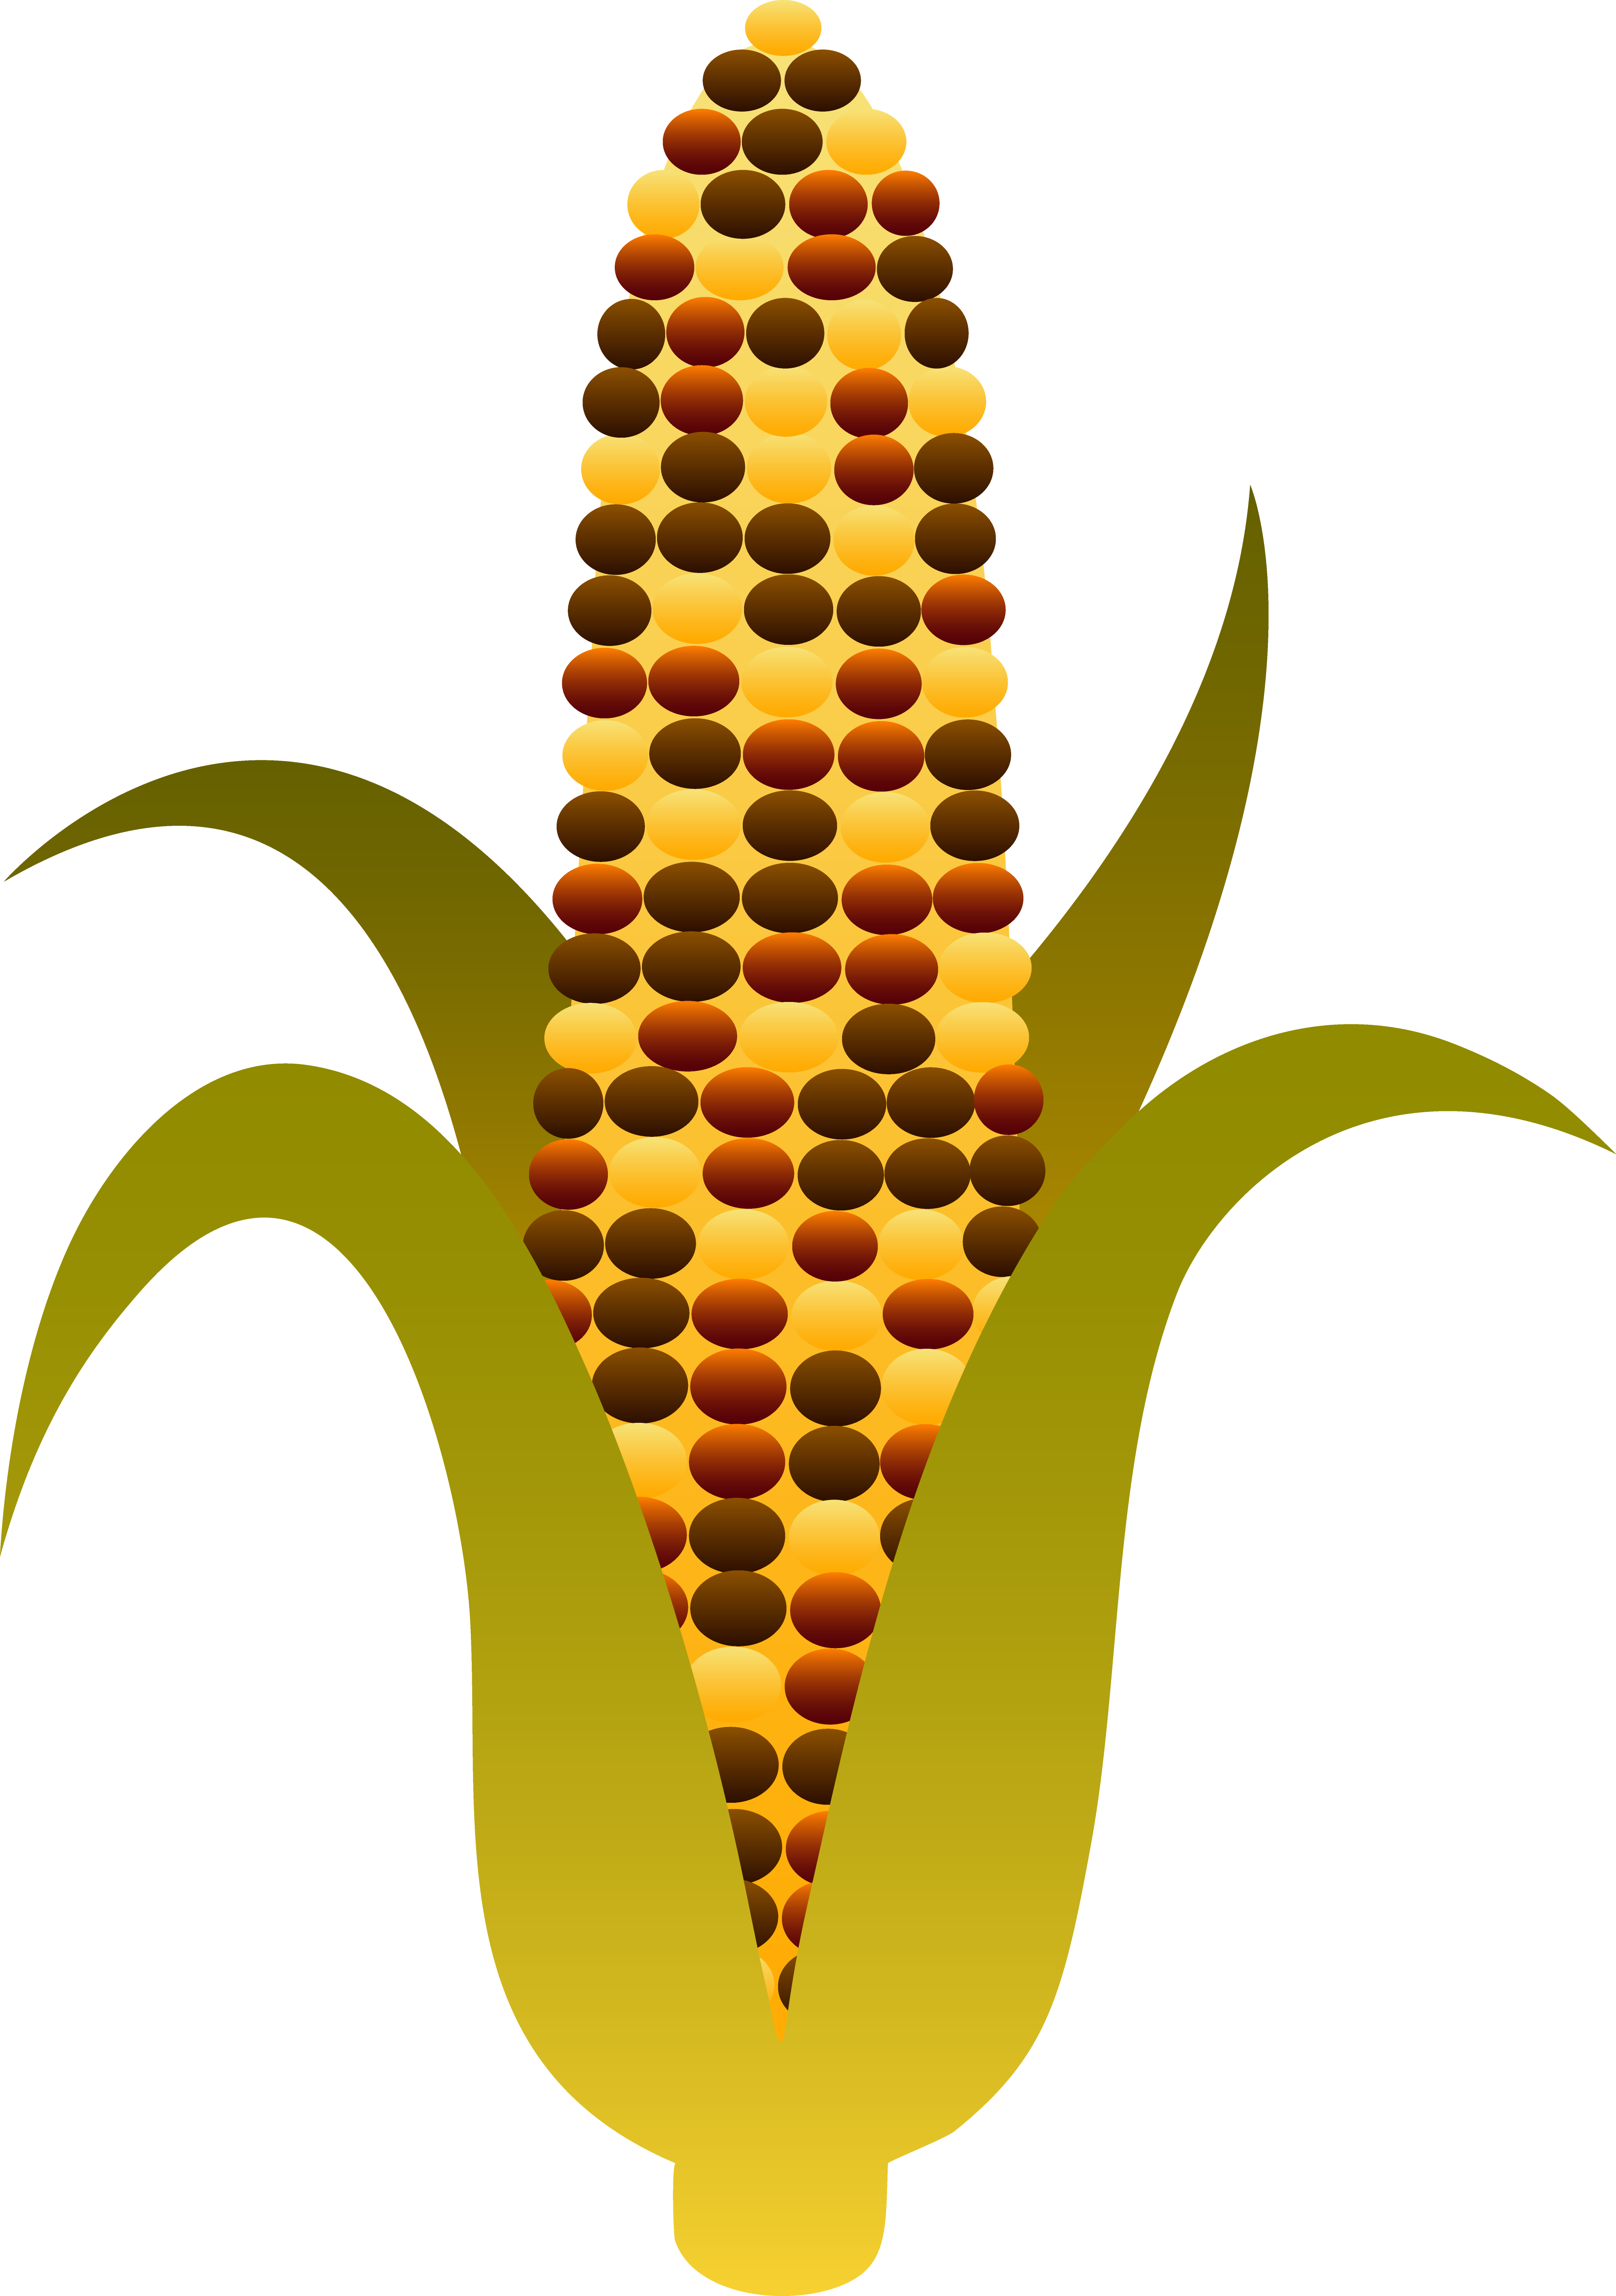 Indian harvest . Grains clipart chaff